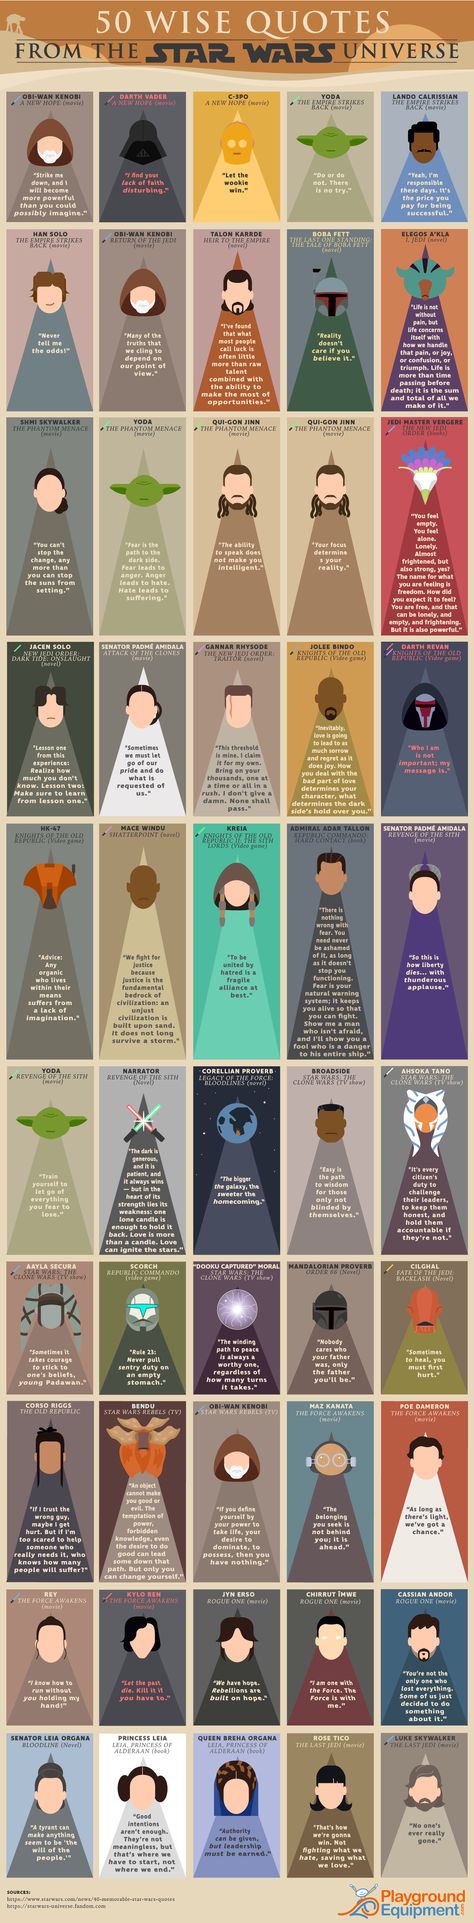 Universe Infographic, Daily Infographic, Star Wars Legacy, Star Wars Meme, Star Wars Quotes, Cuadros Star Wars, Star Wars Facts, Star Wars Tattoo, Star Wars Film